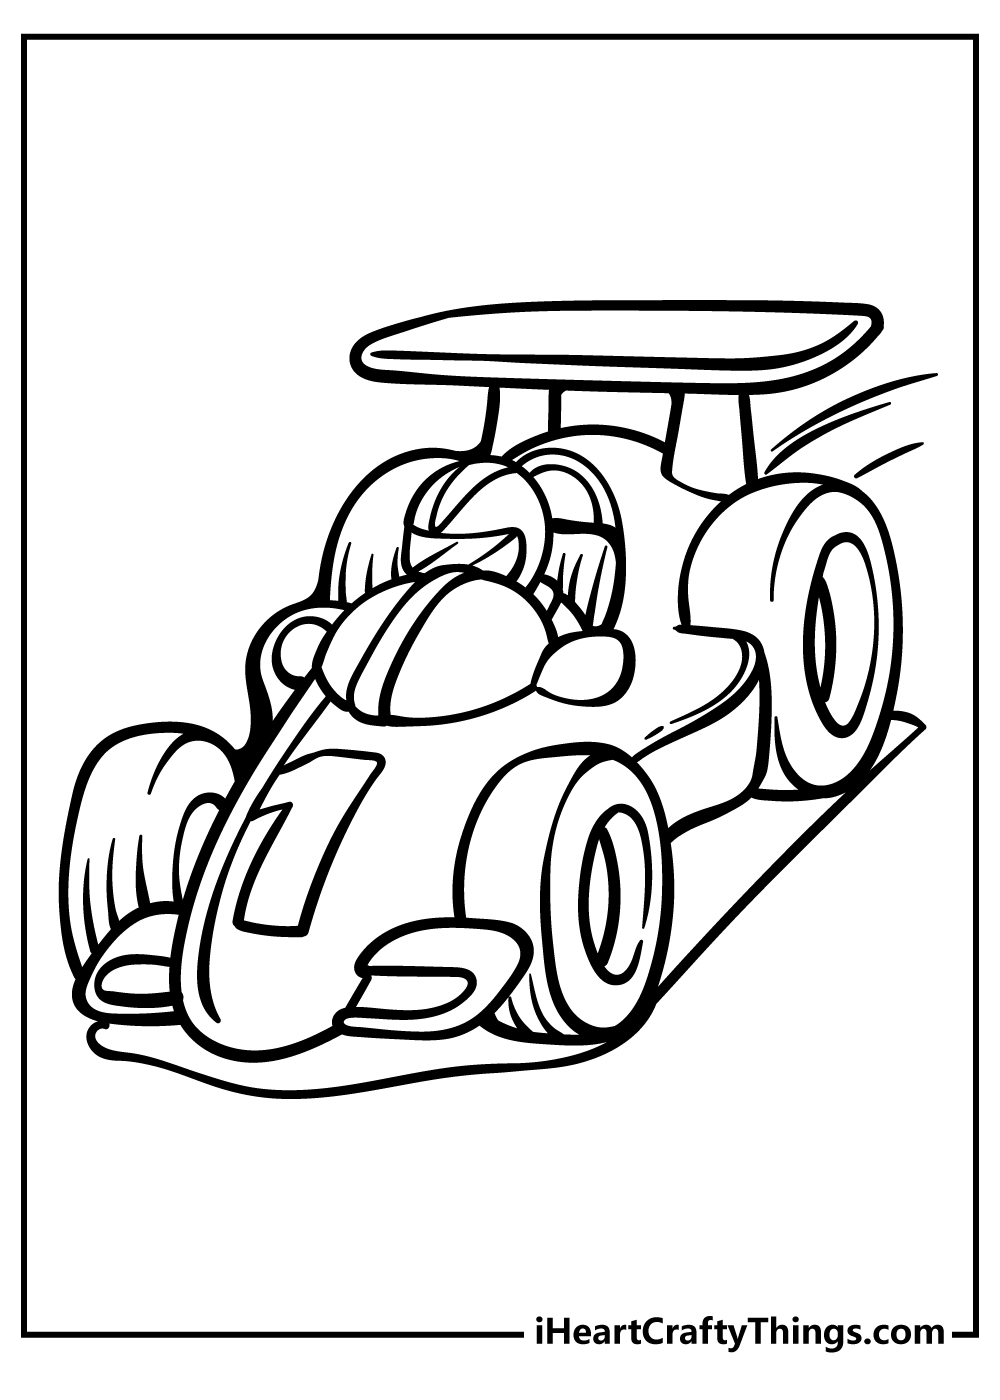 Race car coloring pages free printables